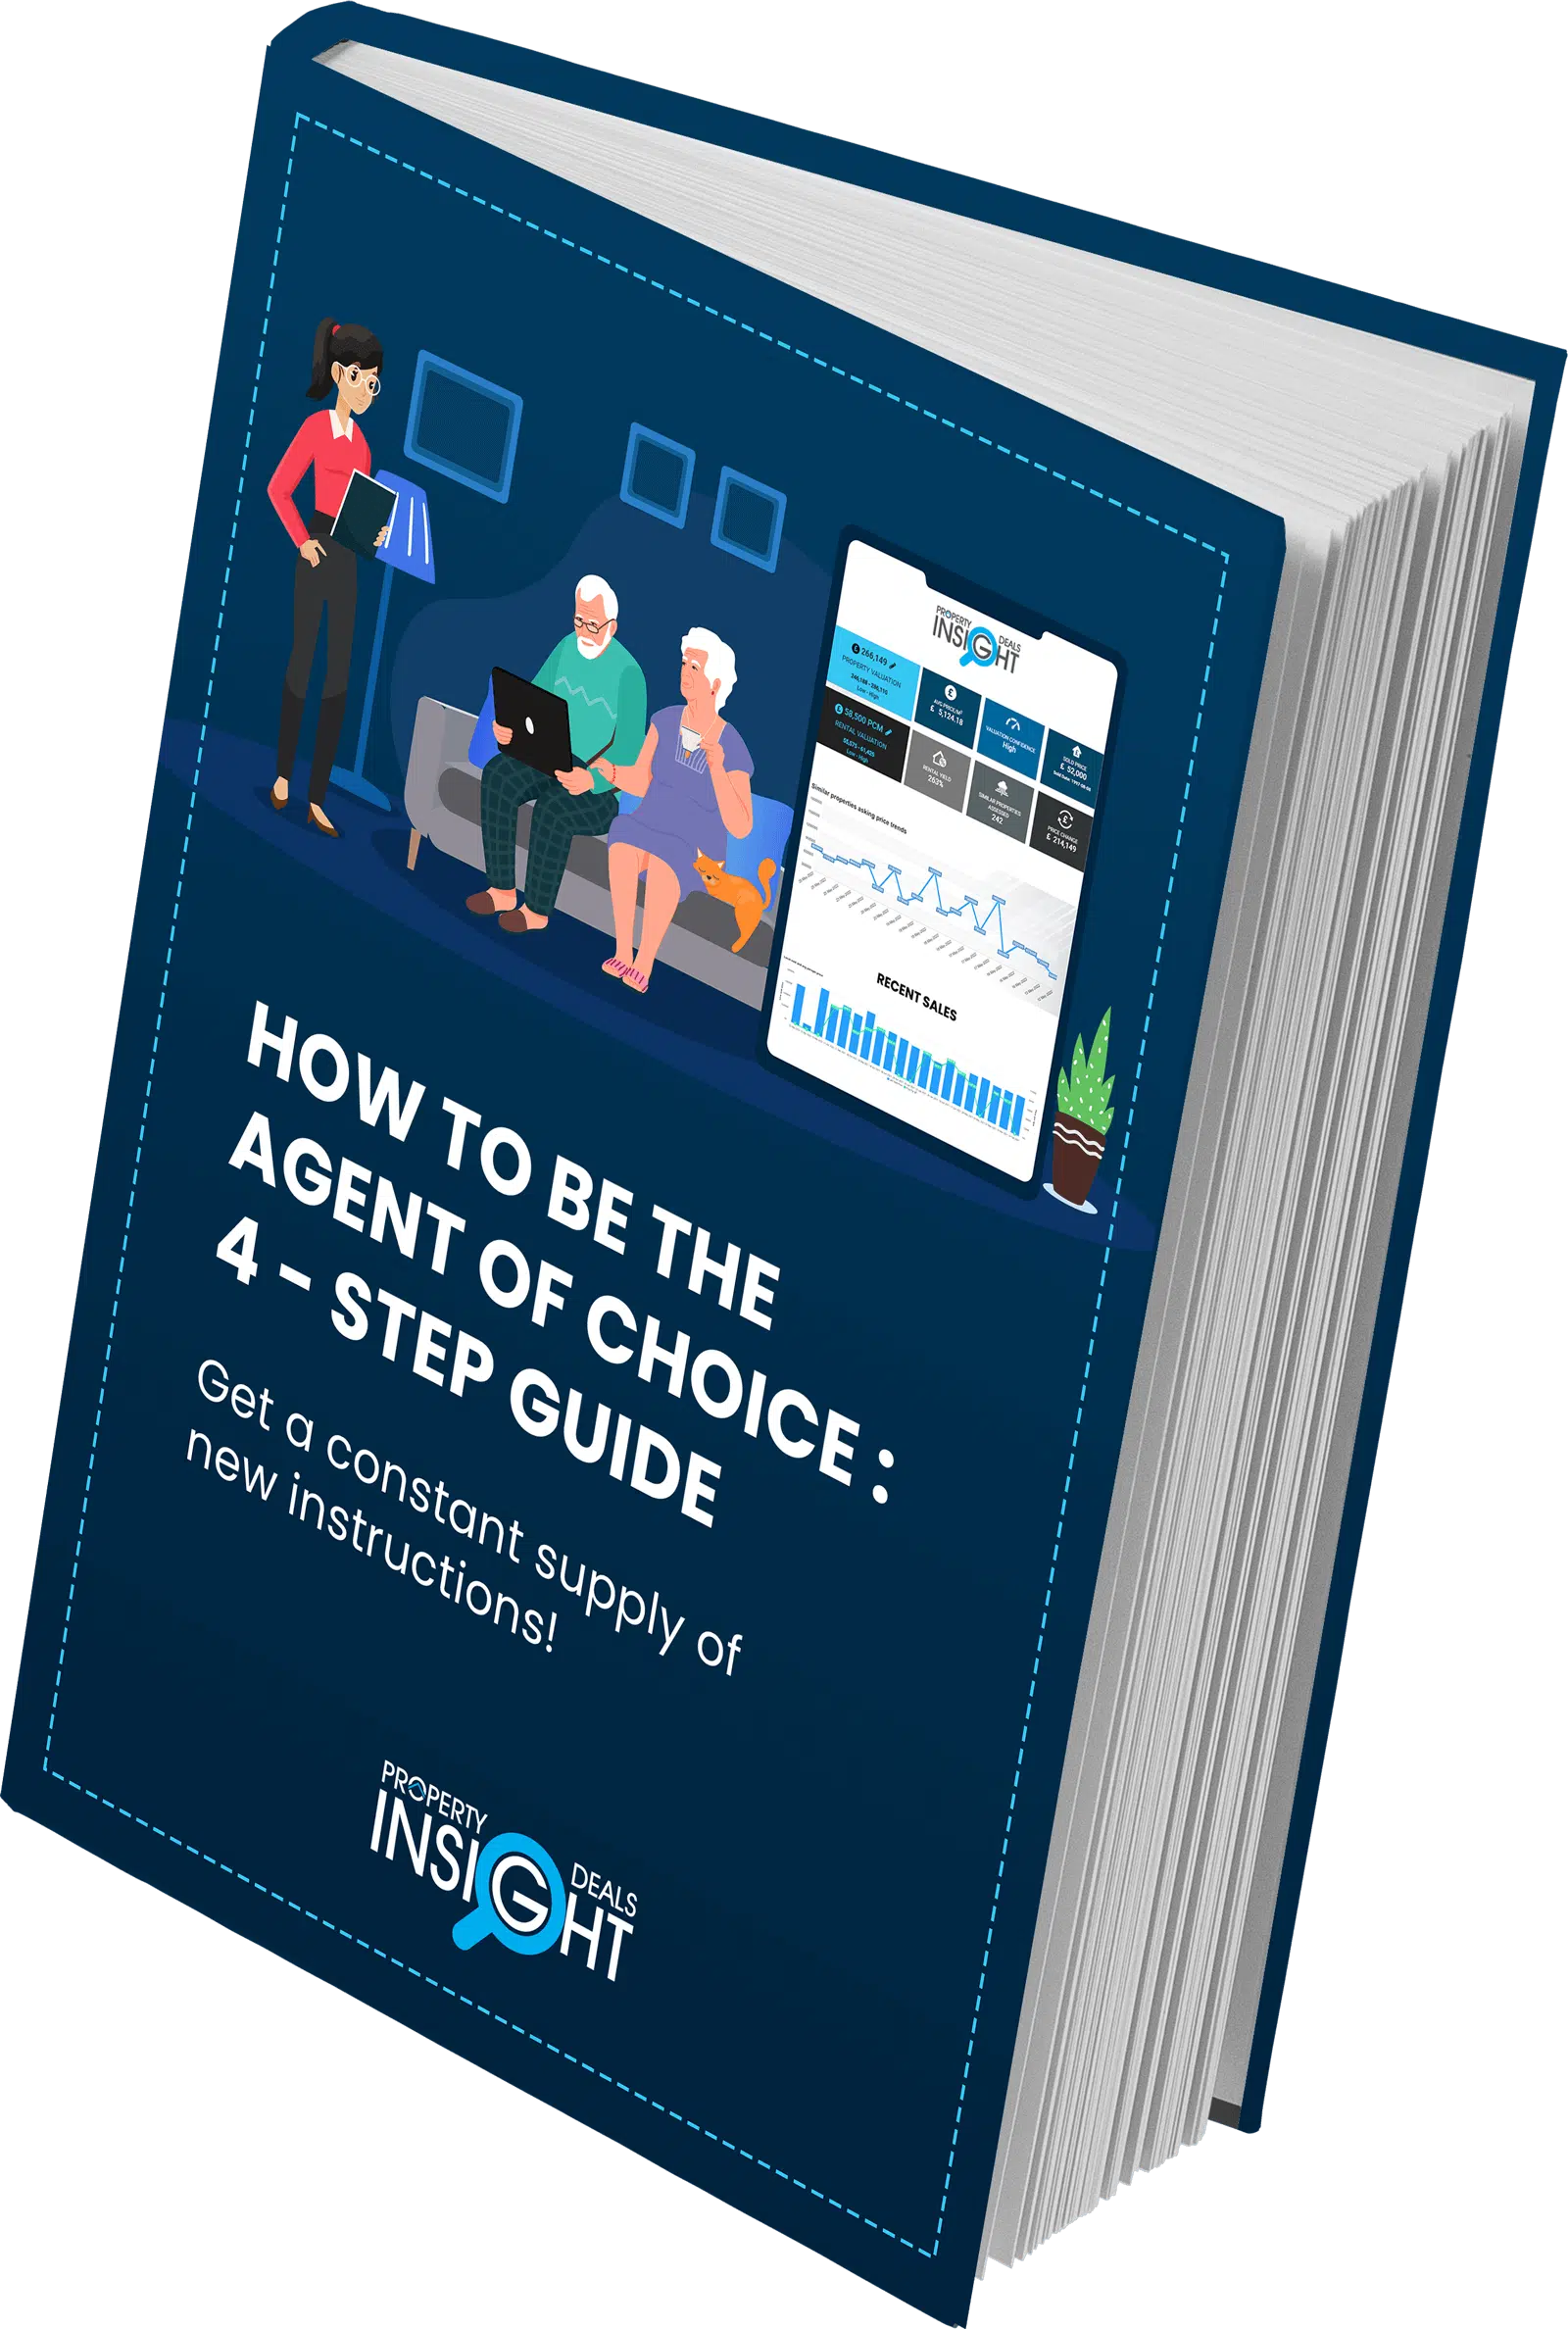 Download your free Ultimate 4-Step Guide to become the Agent of choice